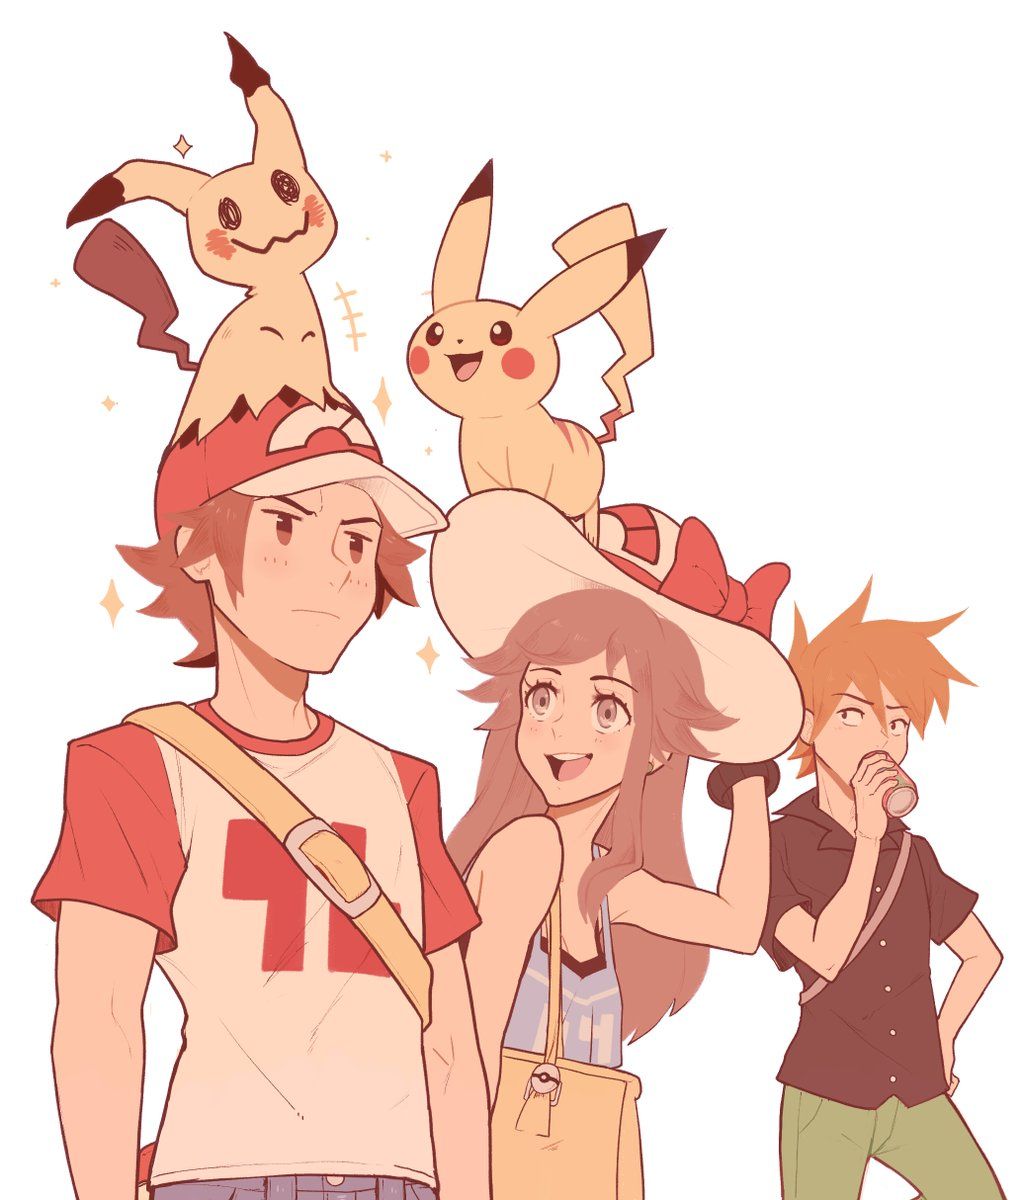 Red likes to be tall. Pokémon Sun and Moon